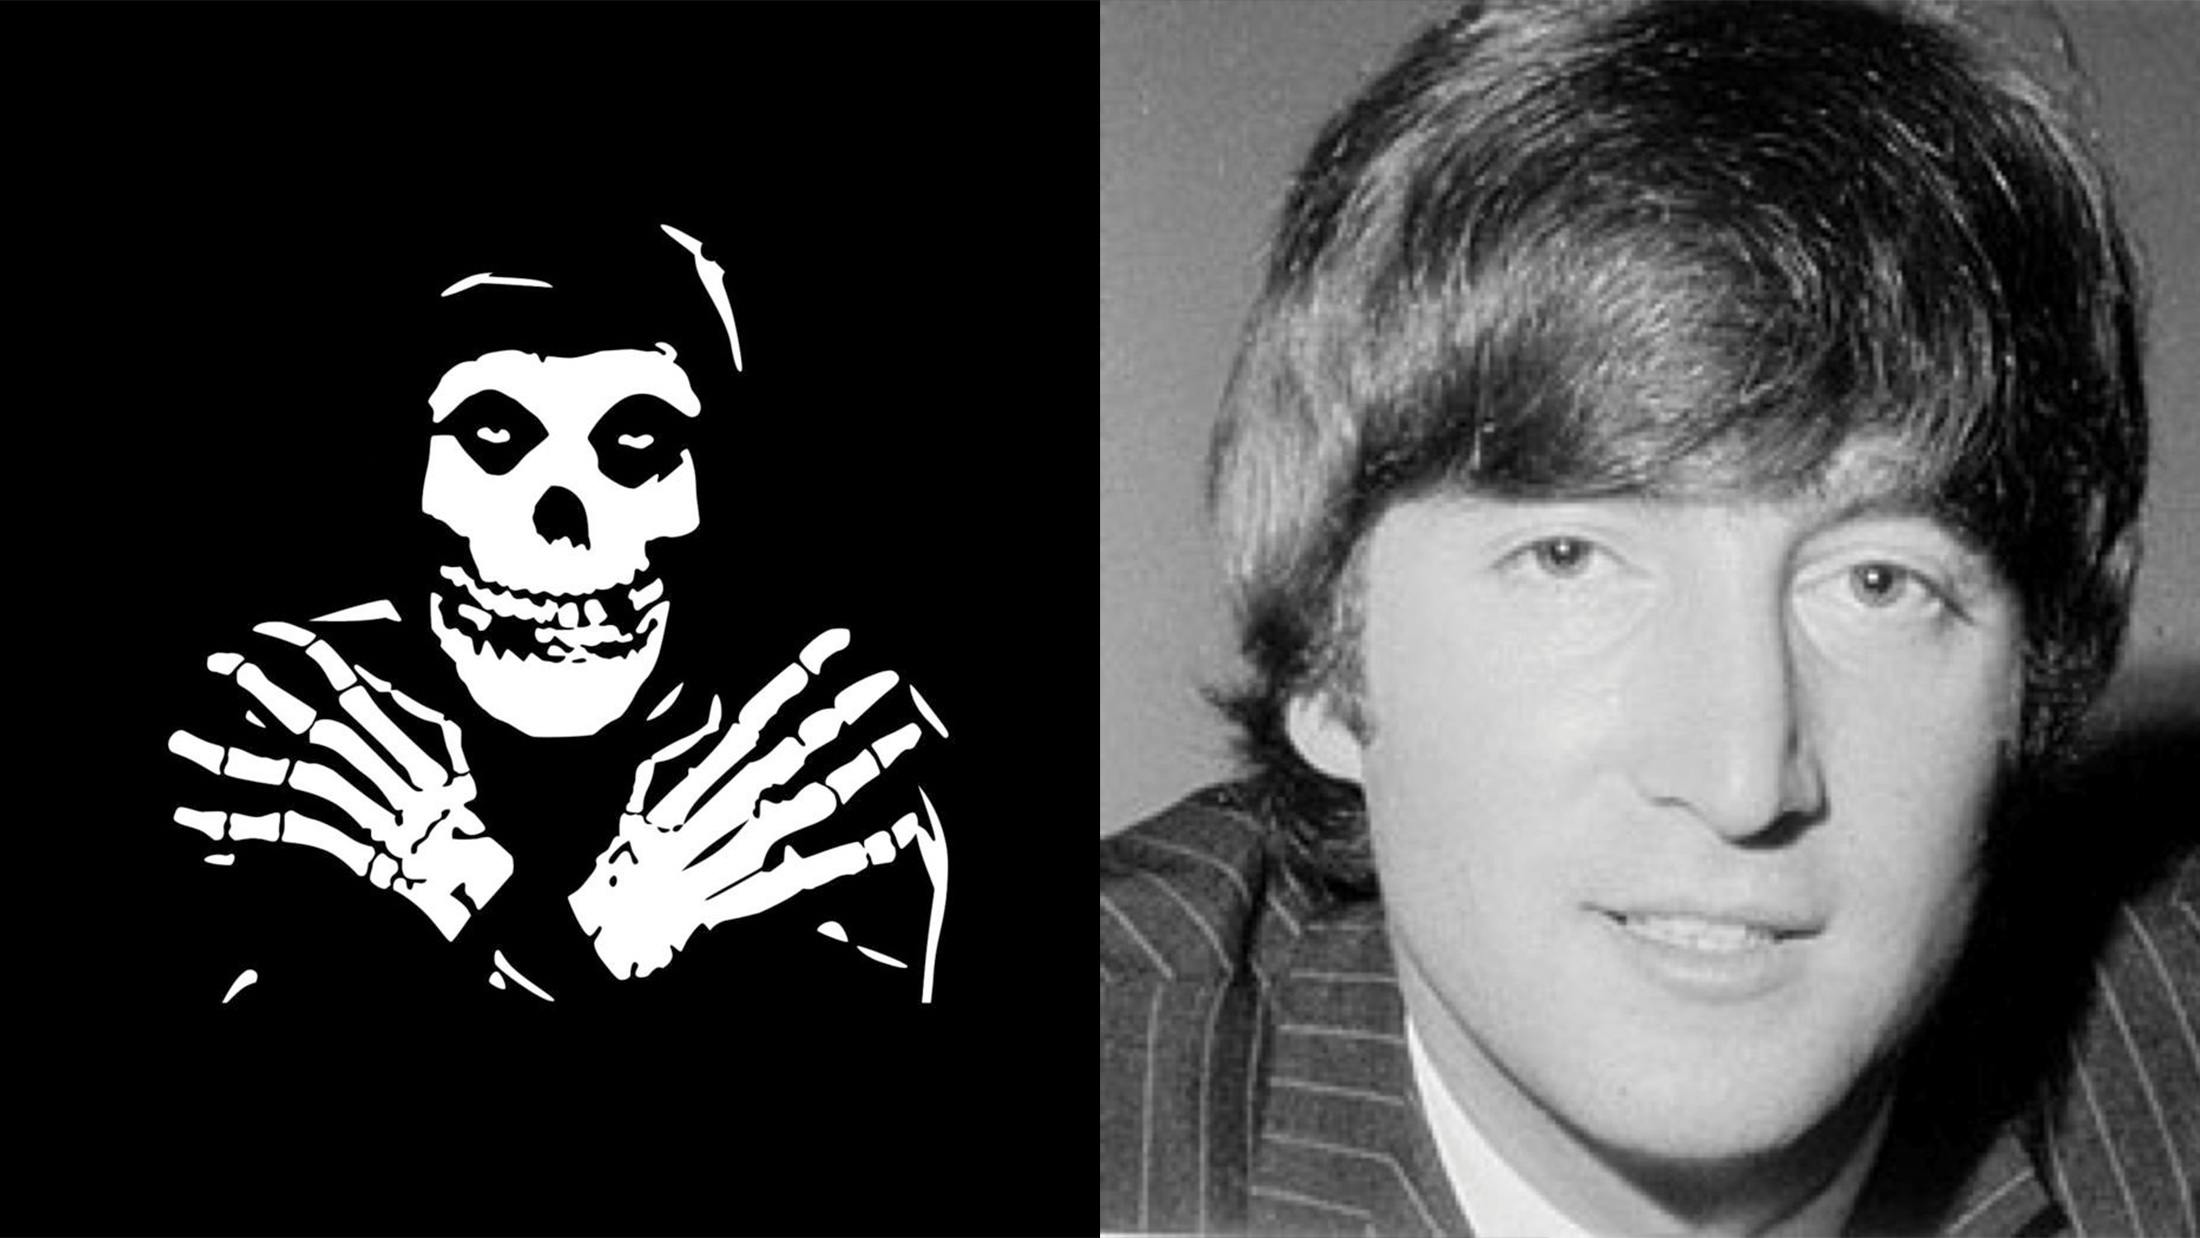 John Lennon Vs The Misfits: The Mash-Up You Never Knew You Needed